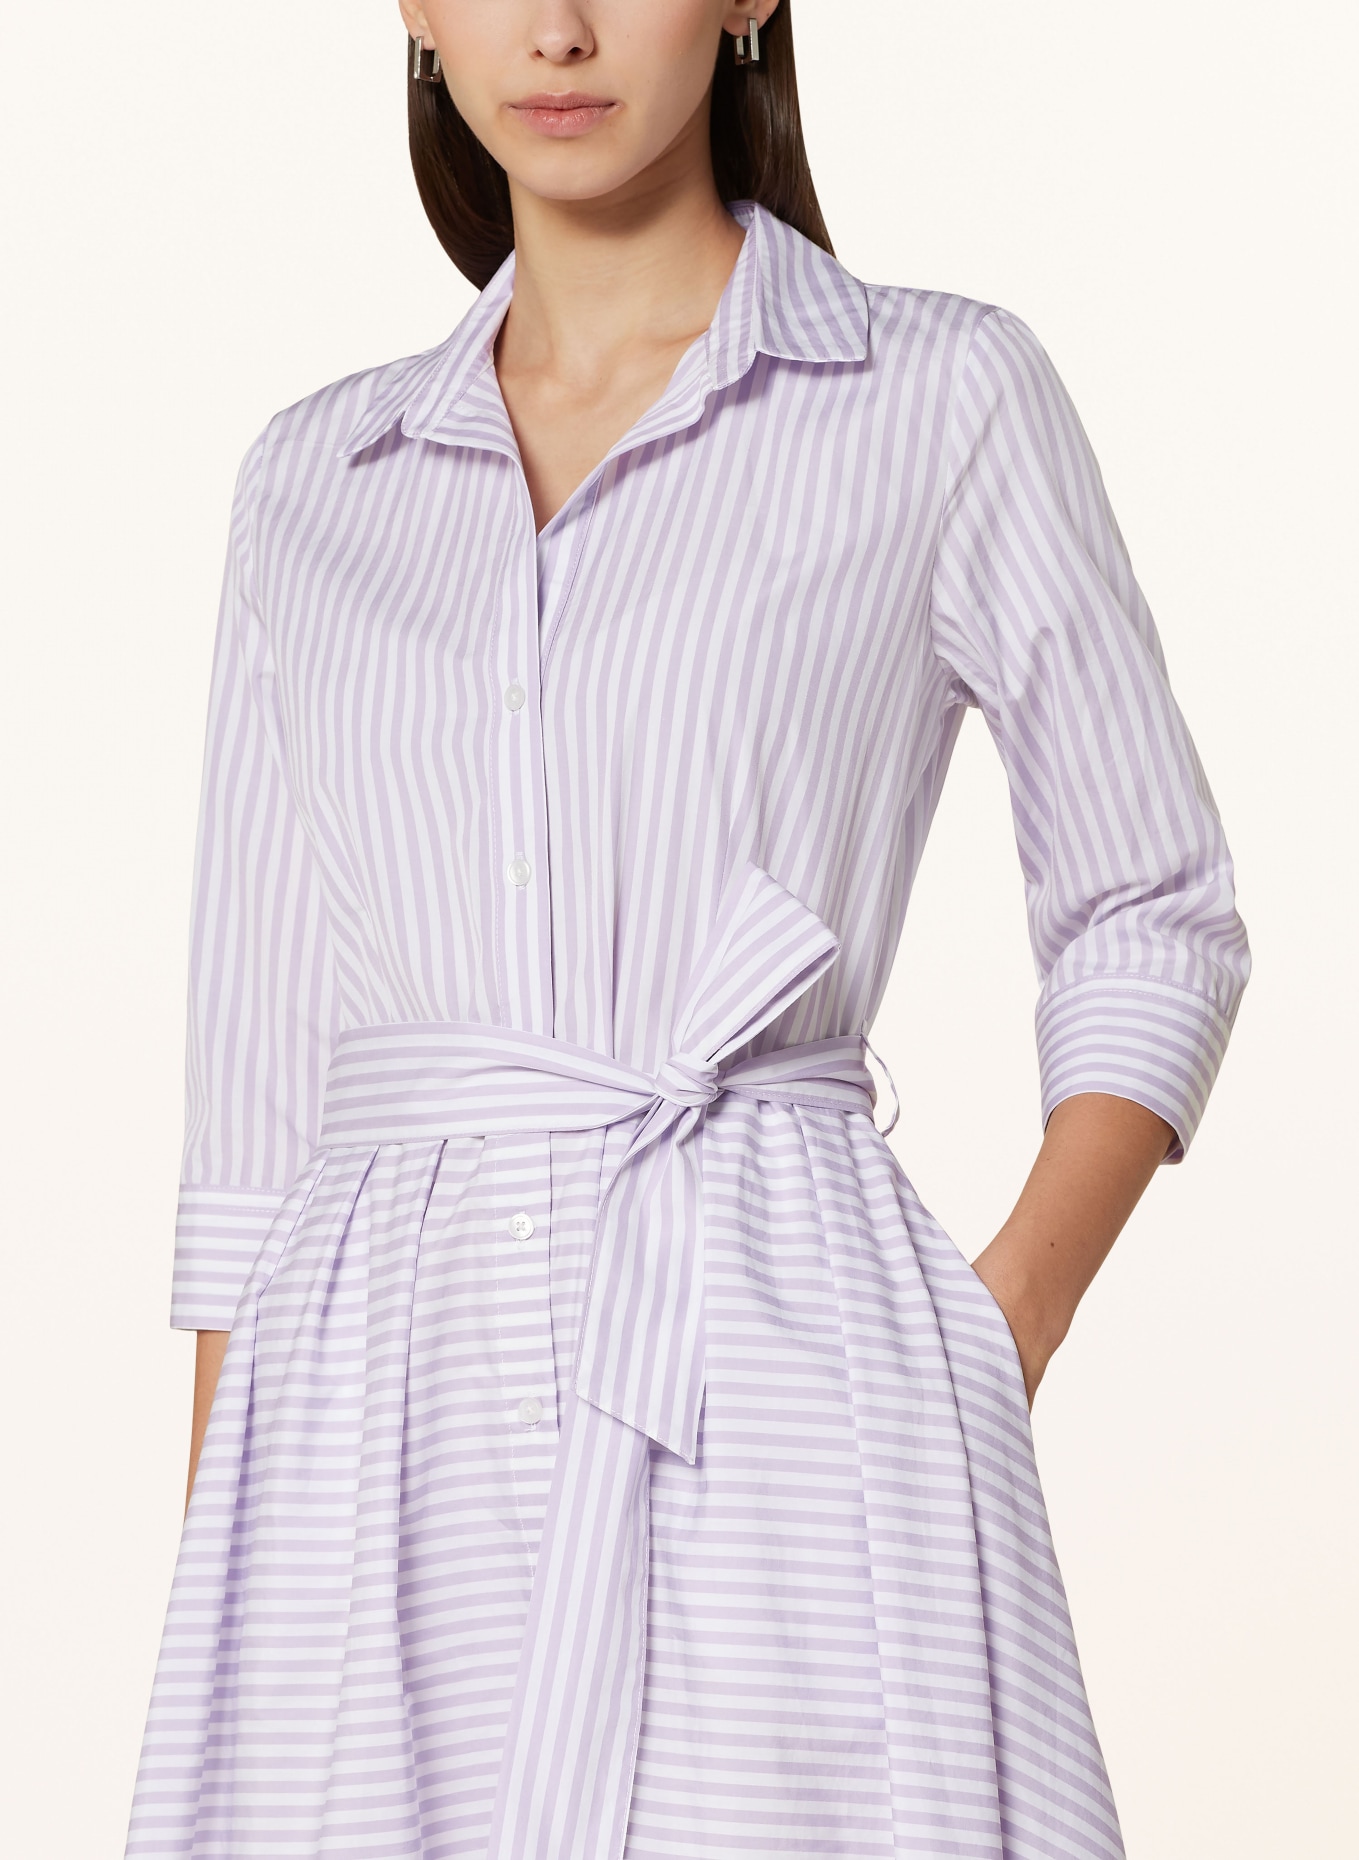 rossana diva Shirt dress with 3/4 sleeves, Color: WHITE/ PURPLE (Image 4)